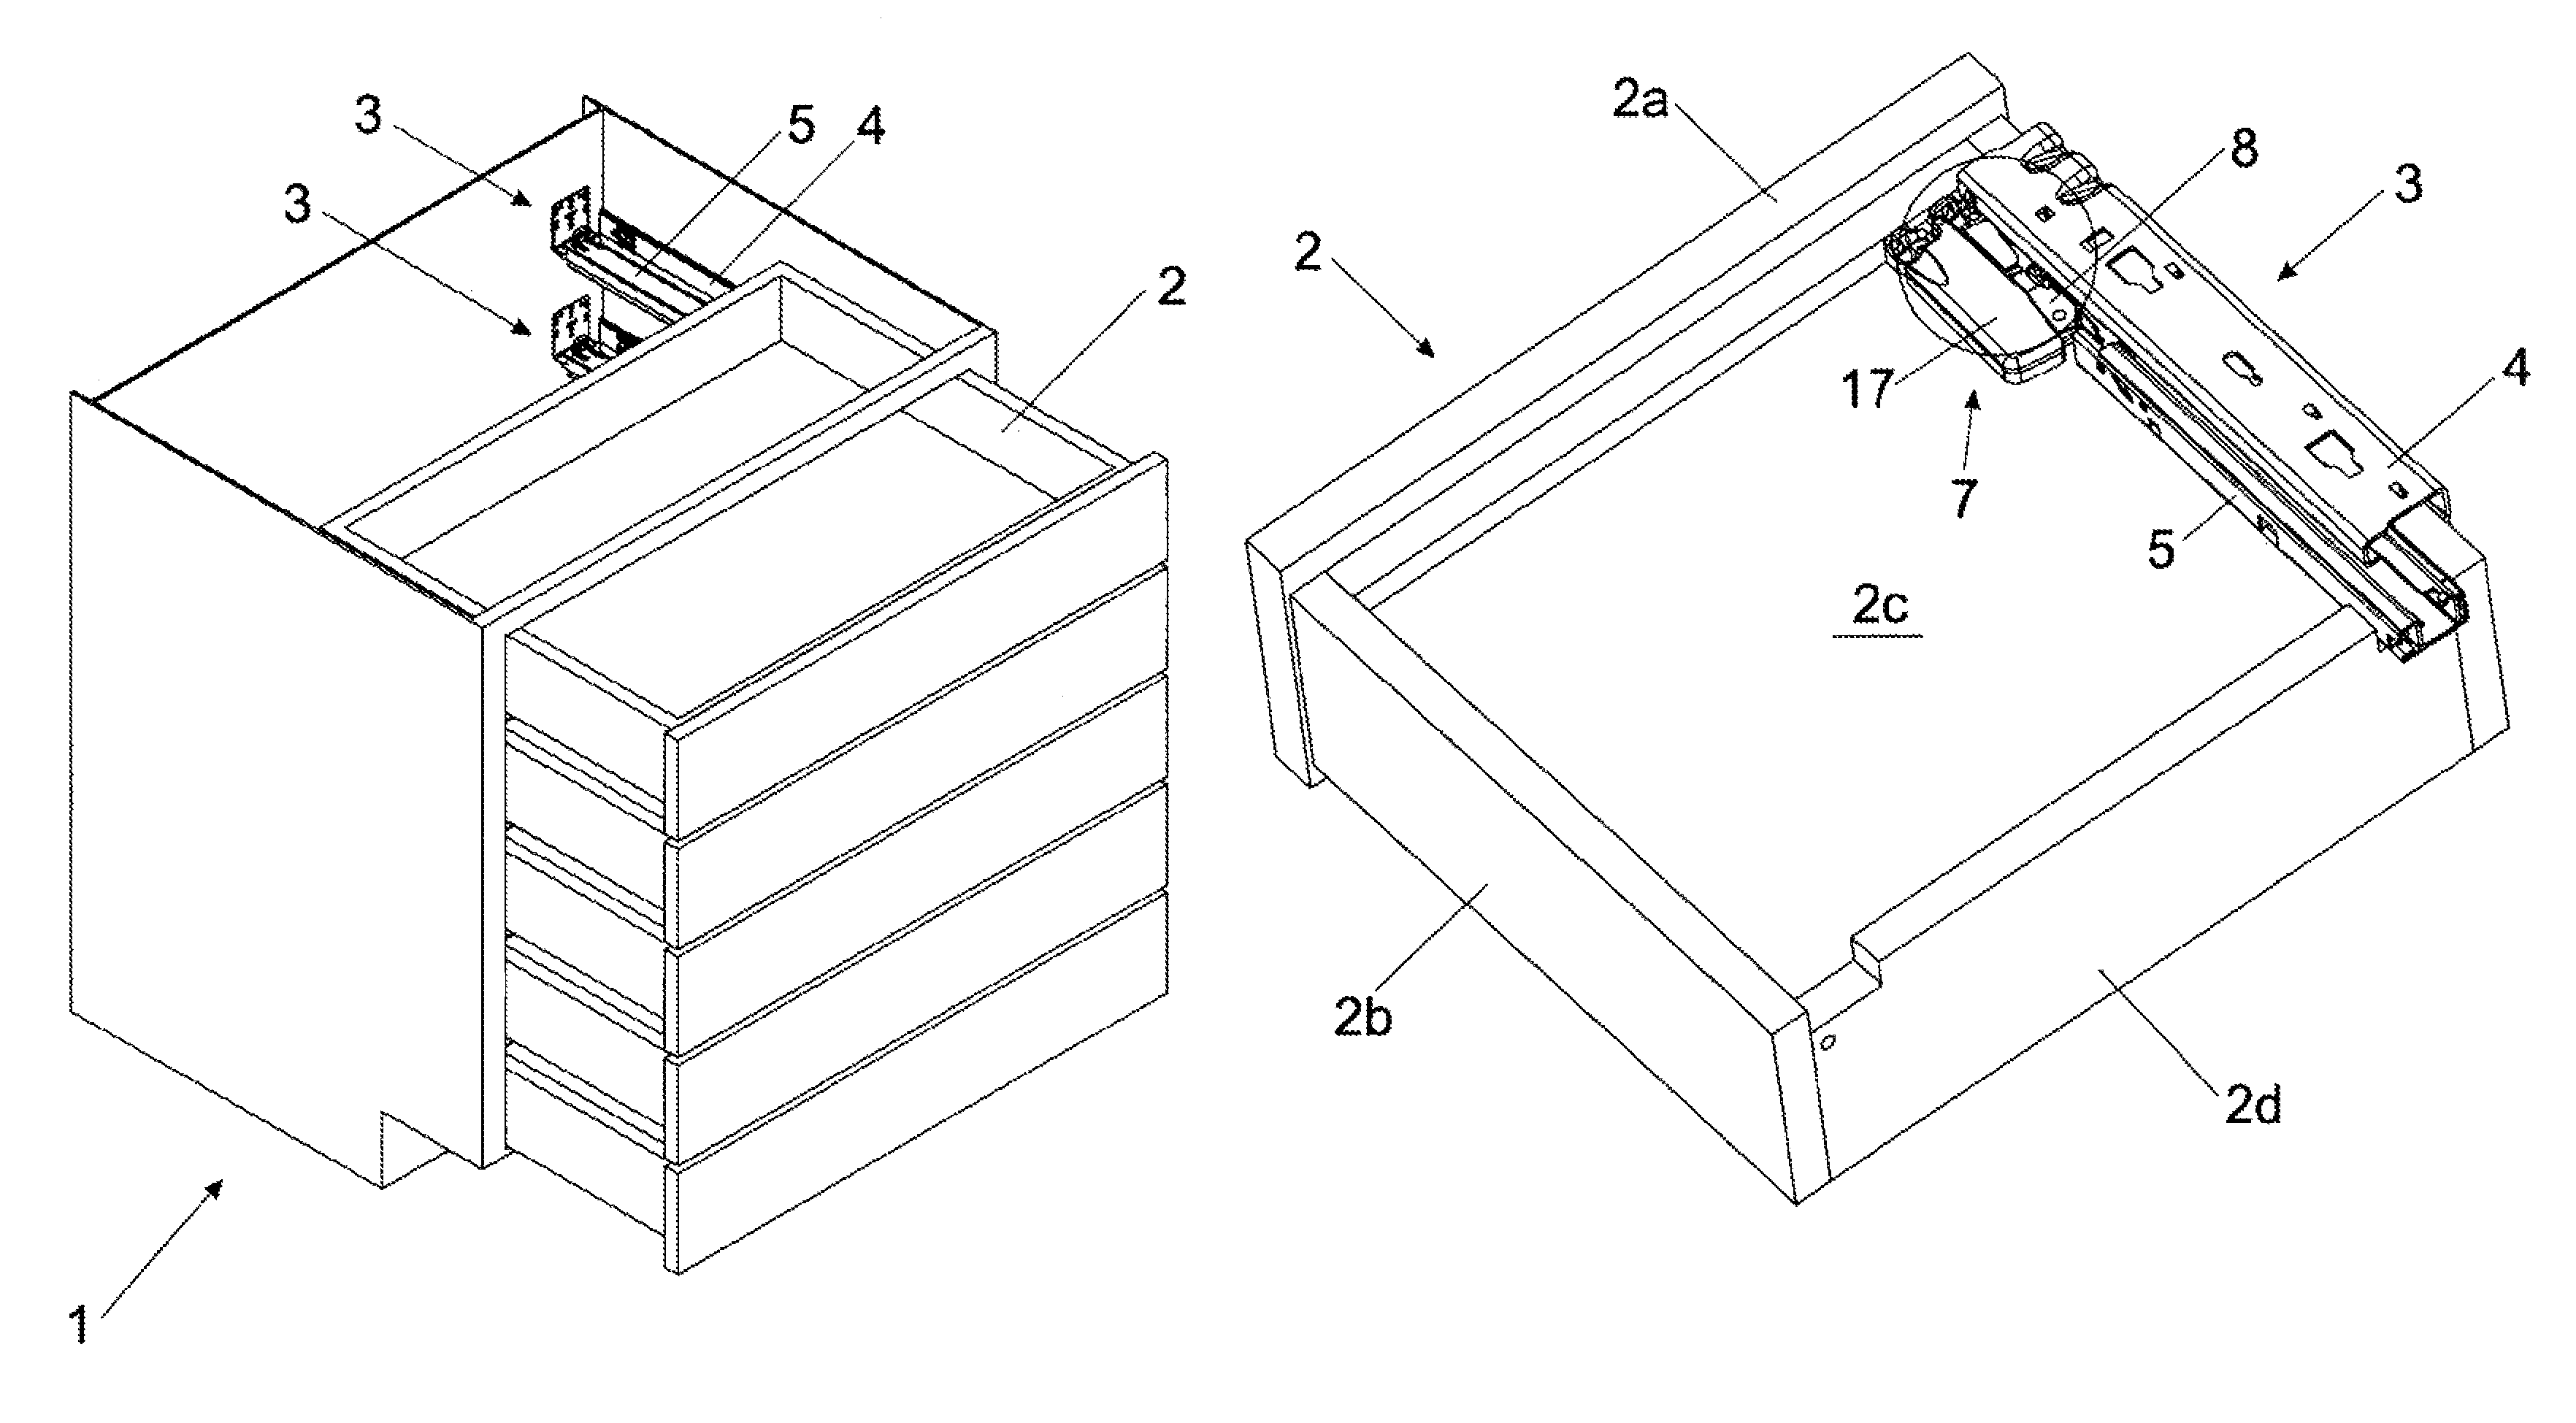 Apparatus for releasably coupling a drawer to a drawer pull-out guide